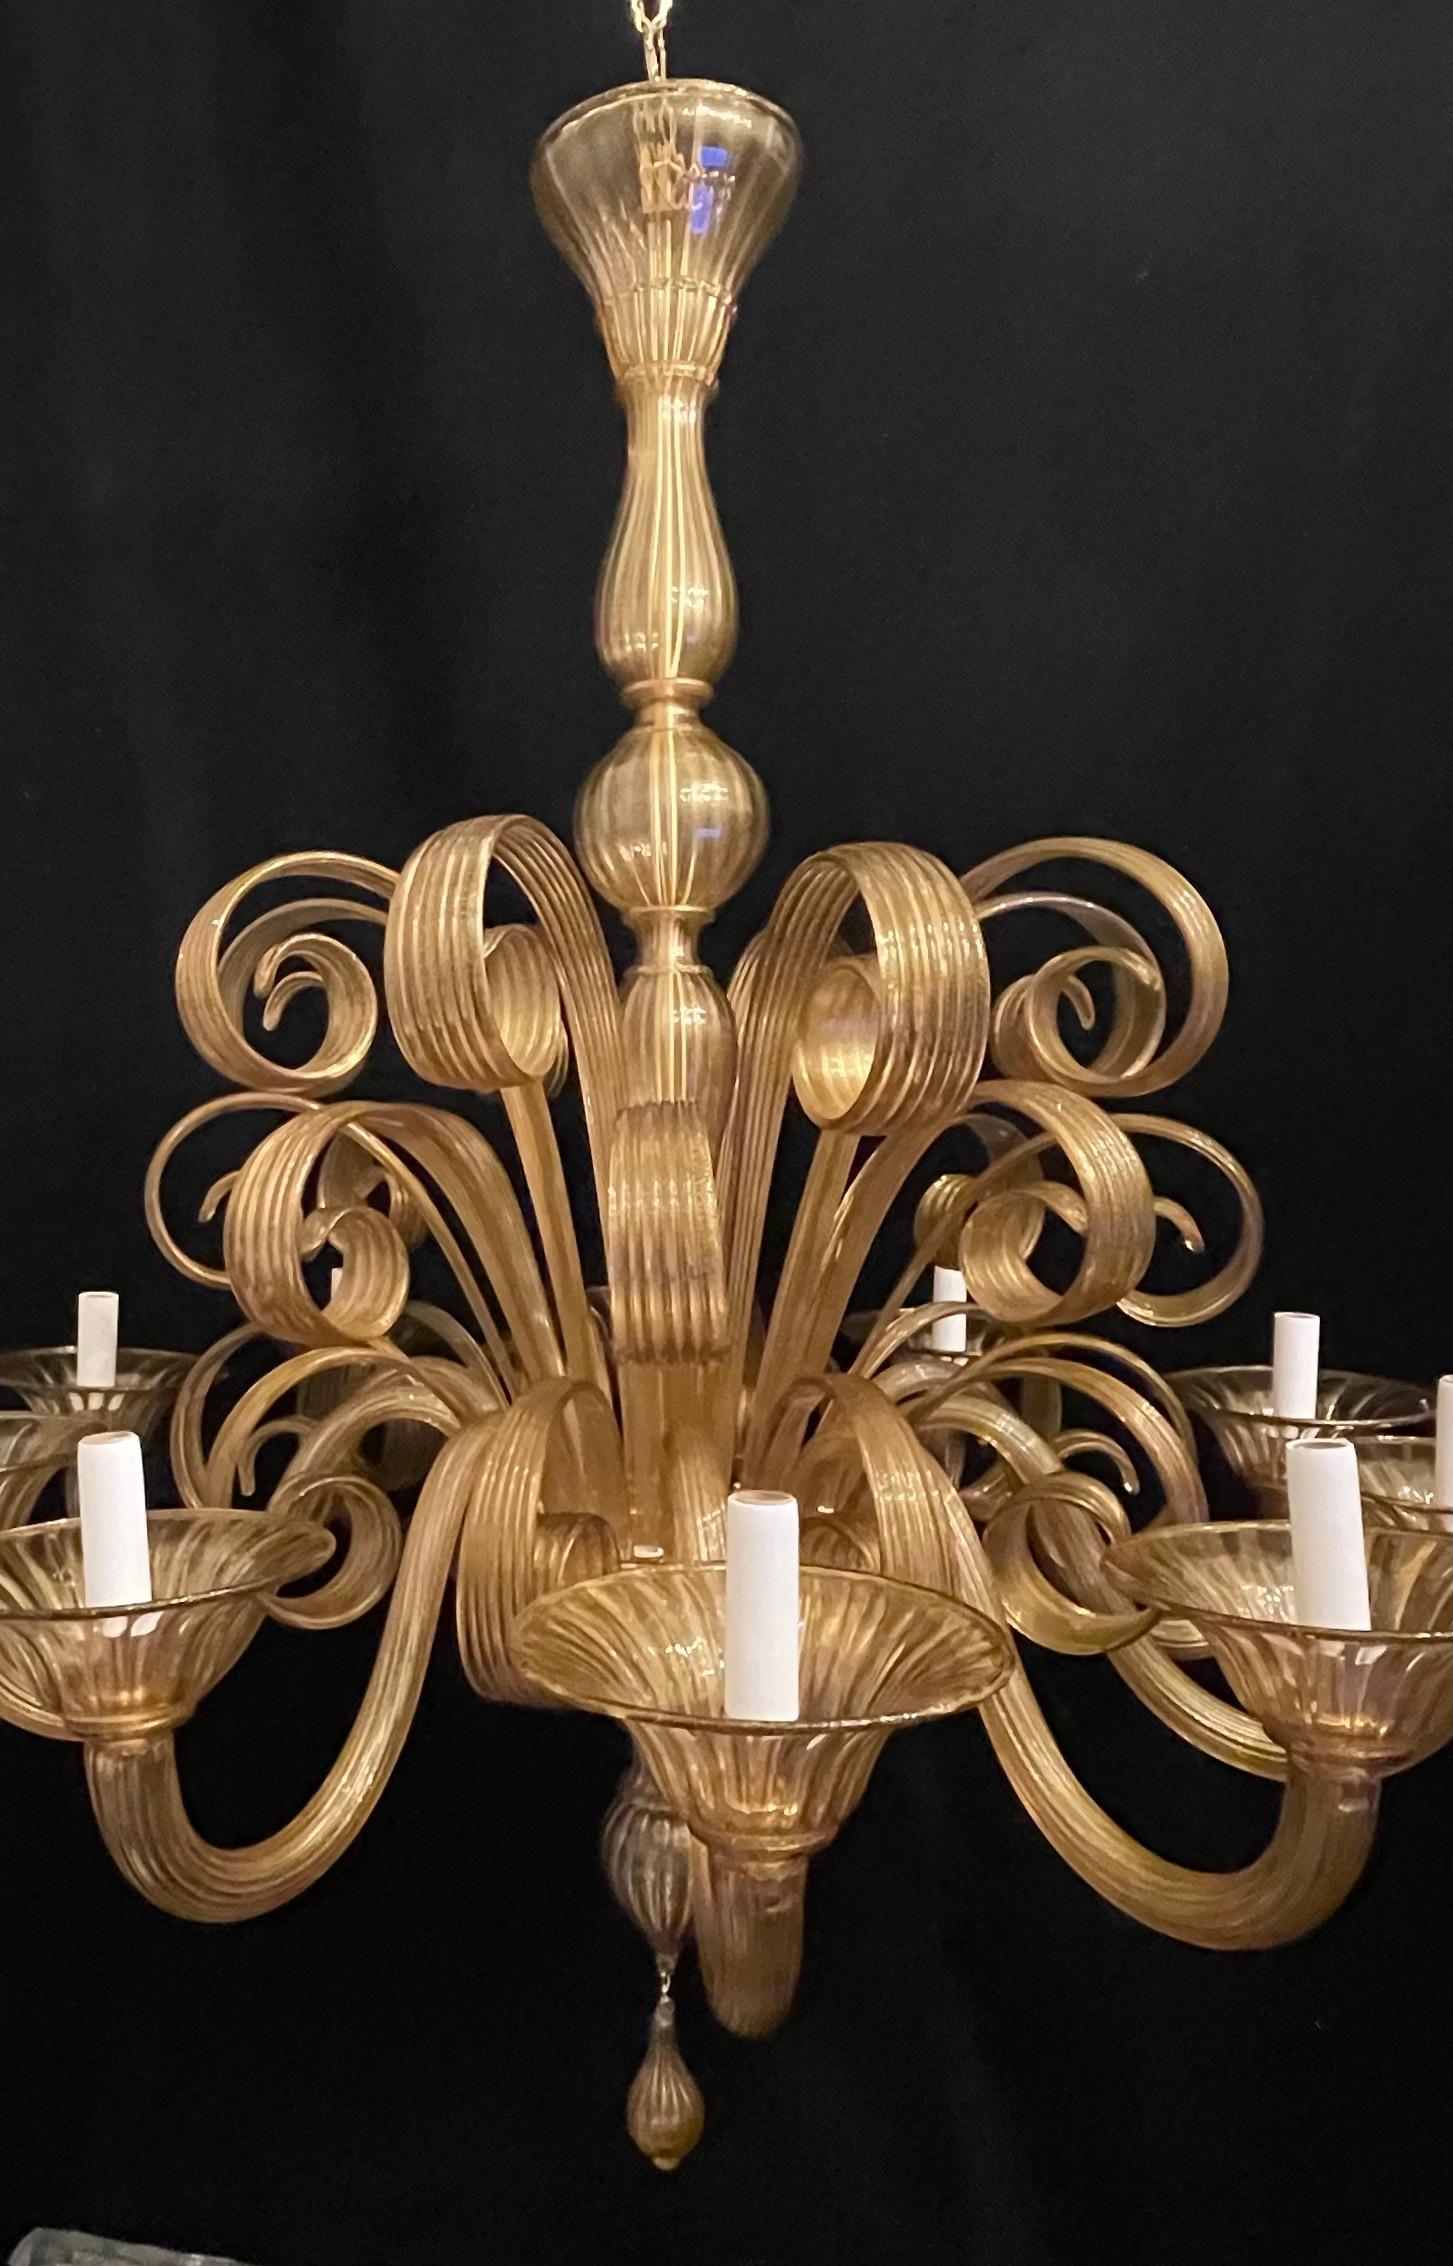 A wonderful large Mid-Century Modern gold flake, hand blown art glass murano chandelier having 10 candelabra lights completely rewired with new sockets and comes ready to install with chain canopy and mounting hardware.
From The Lorin Marsh